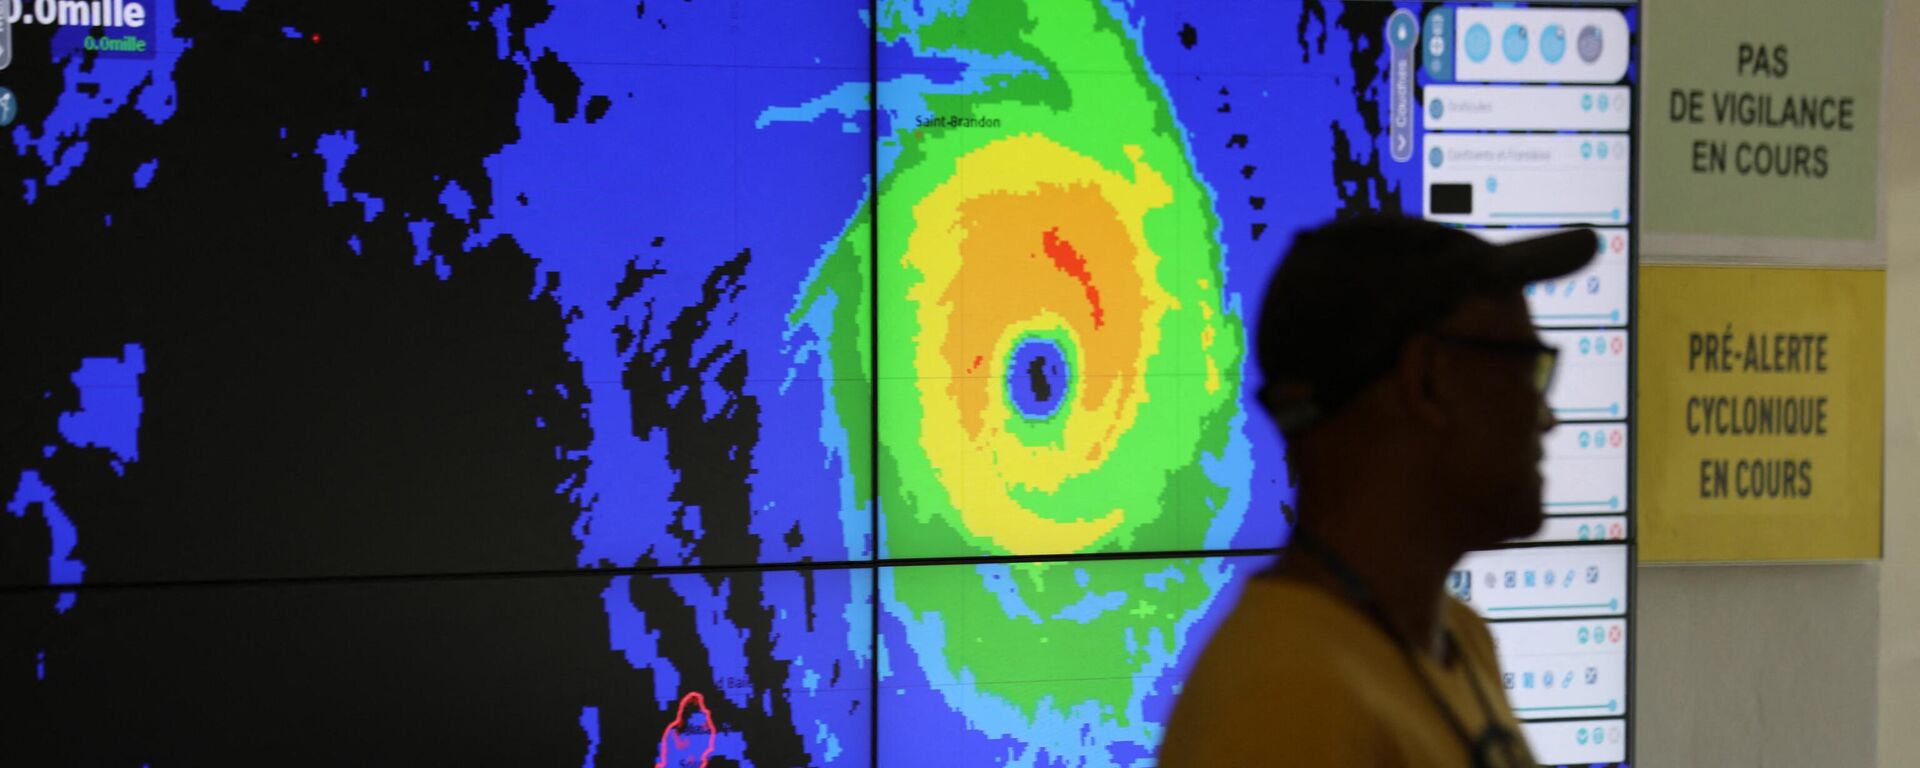 Forecasters monitor Cyclone Freddy at the France weather station, Meteo France, in Saint Denis de la Reunion, on the French overseas island of La Reunion on February 20, 2023 - Sputnik Africa, 1920, 22.02.2023